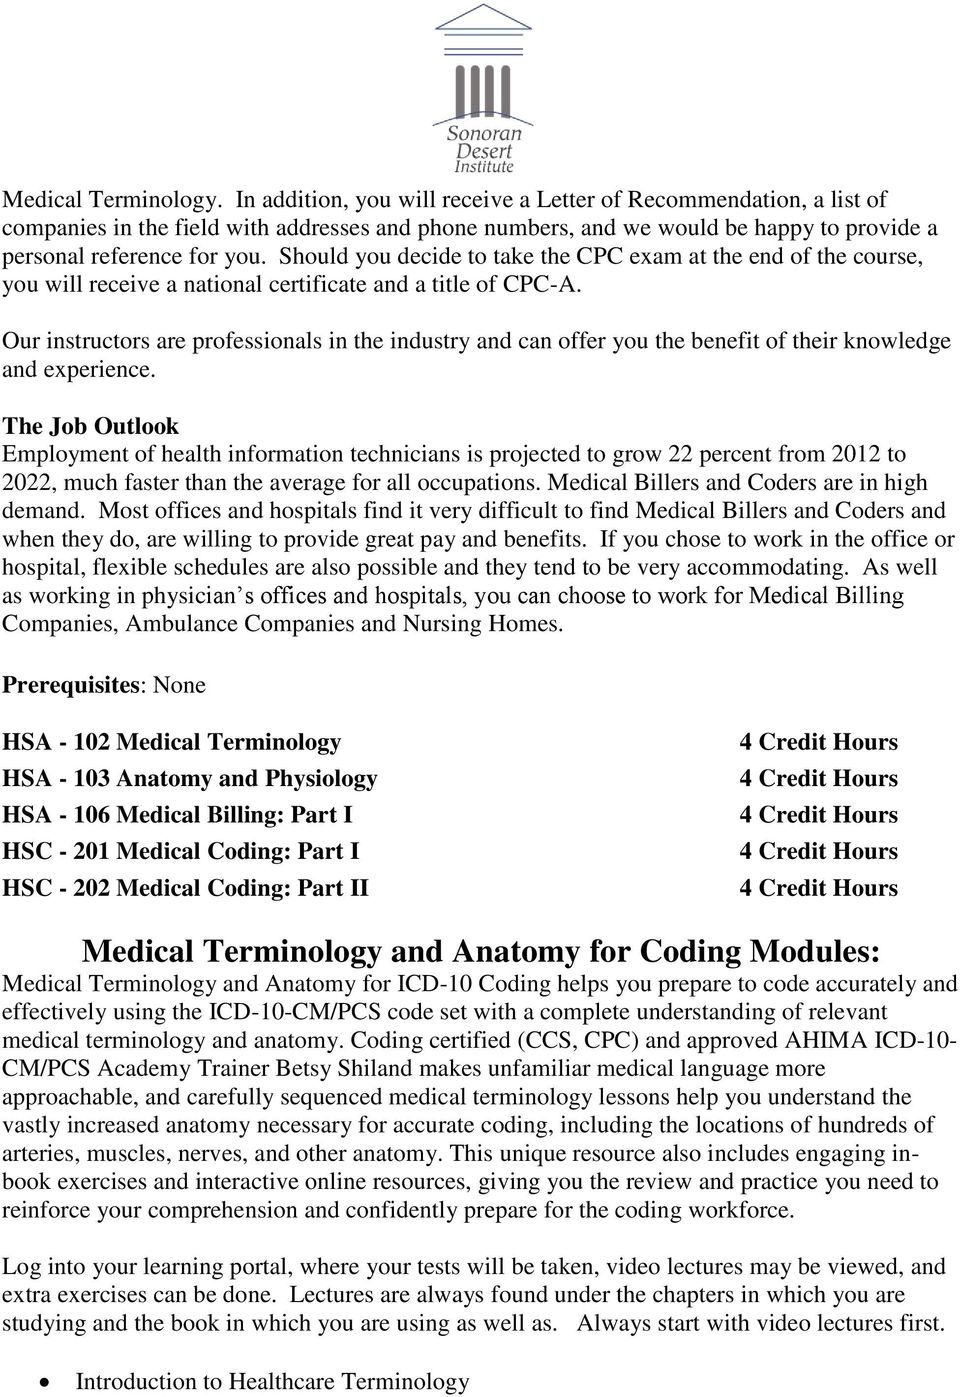 Medical Billing And Coding Certificate Pdf Free Download with regard to sizing 960 X 1397